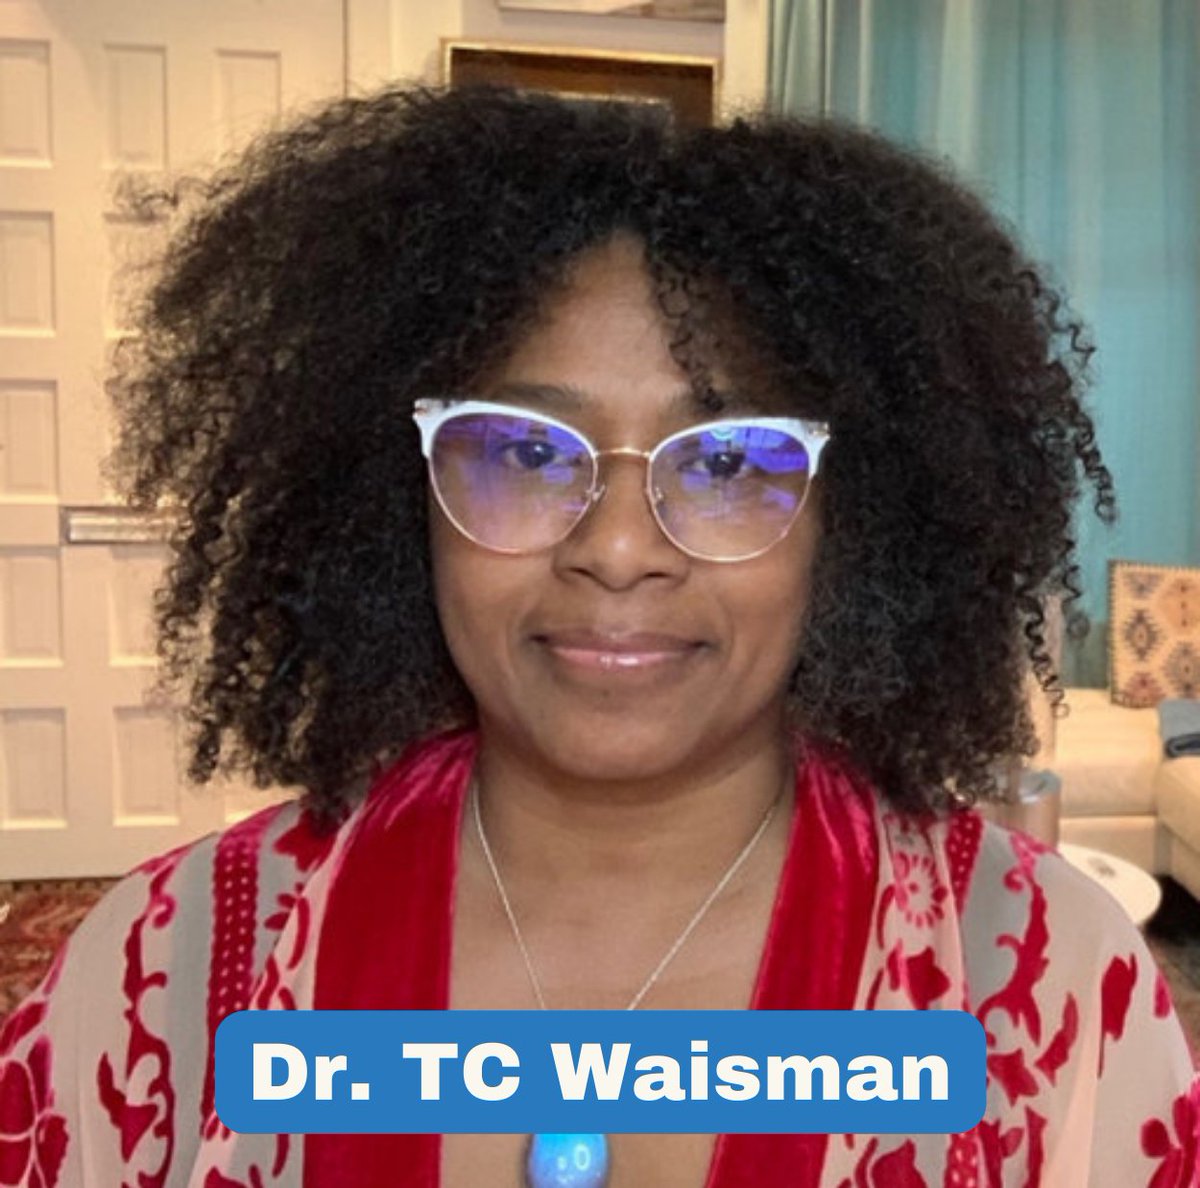 This #BlackHistoryMonth we are highlighting the work of Black #activists who have been influential in making this country better for those in the #DisabilityCommunity. 

Dr. TC Waisman is an autistic autism researcher.